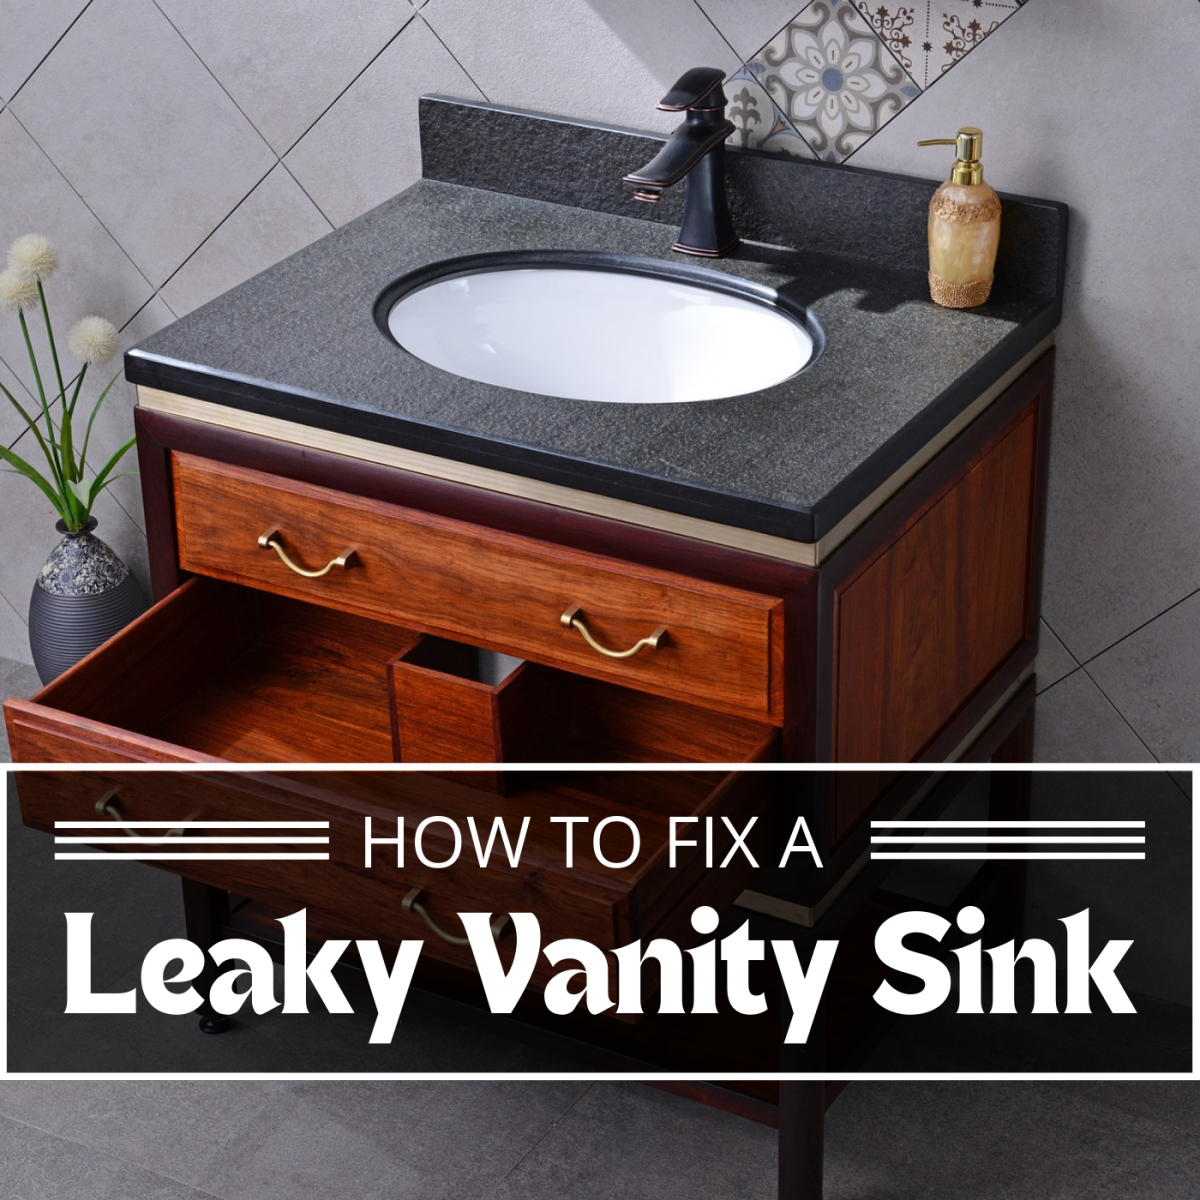 Is your vanity sink leaking water into the storage cabinets below? This can be an easy fix with the right tools and instructions. 